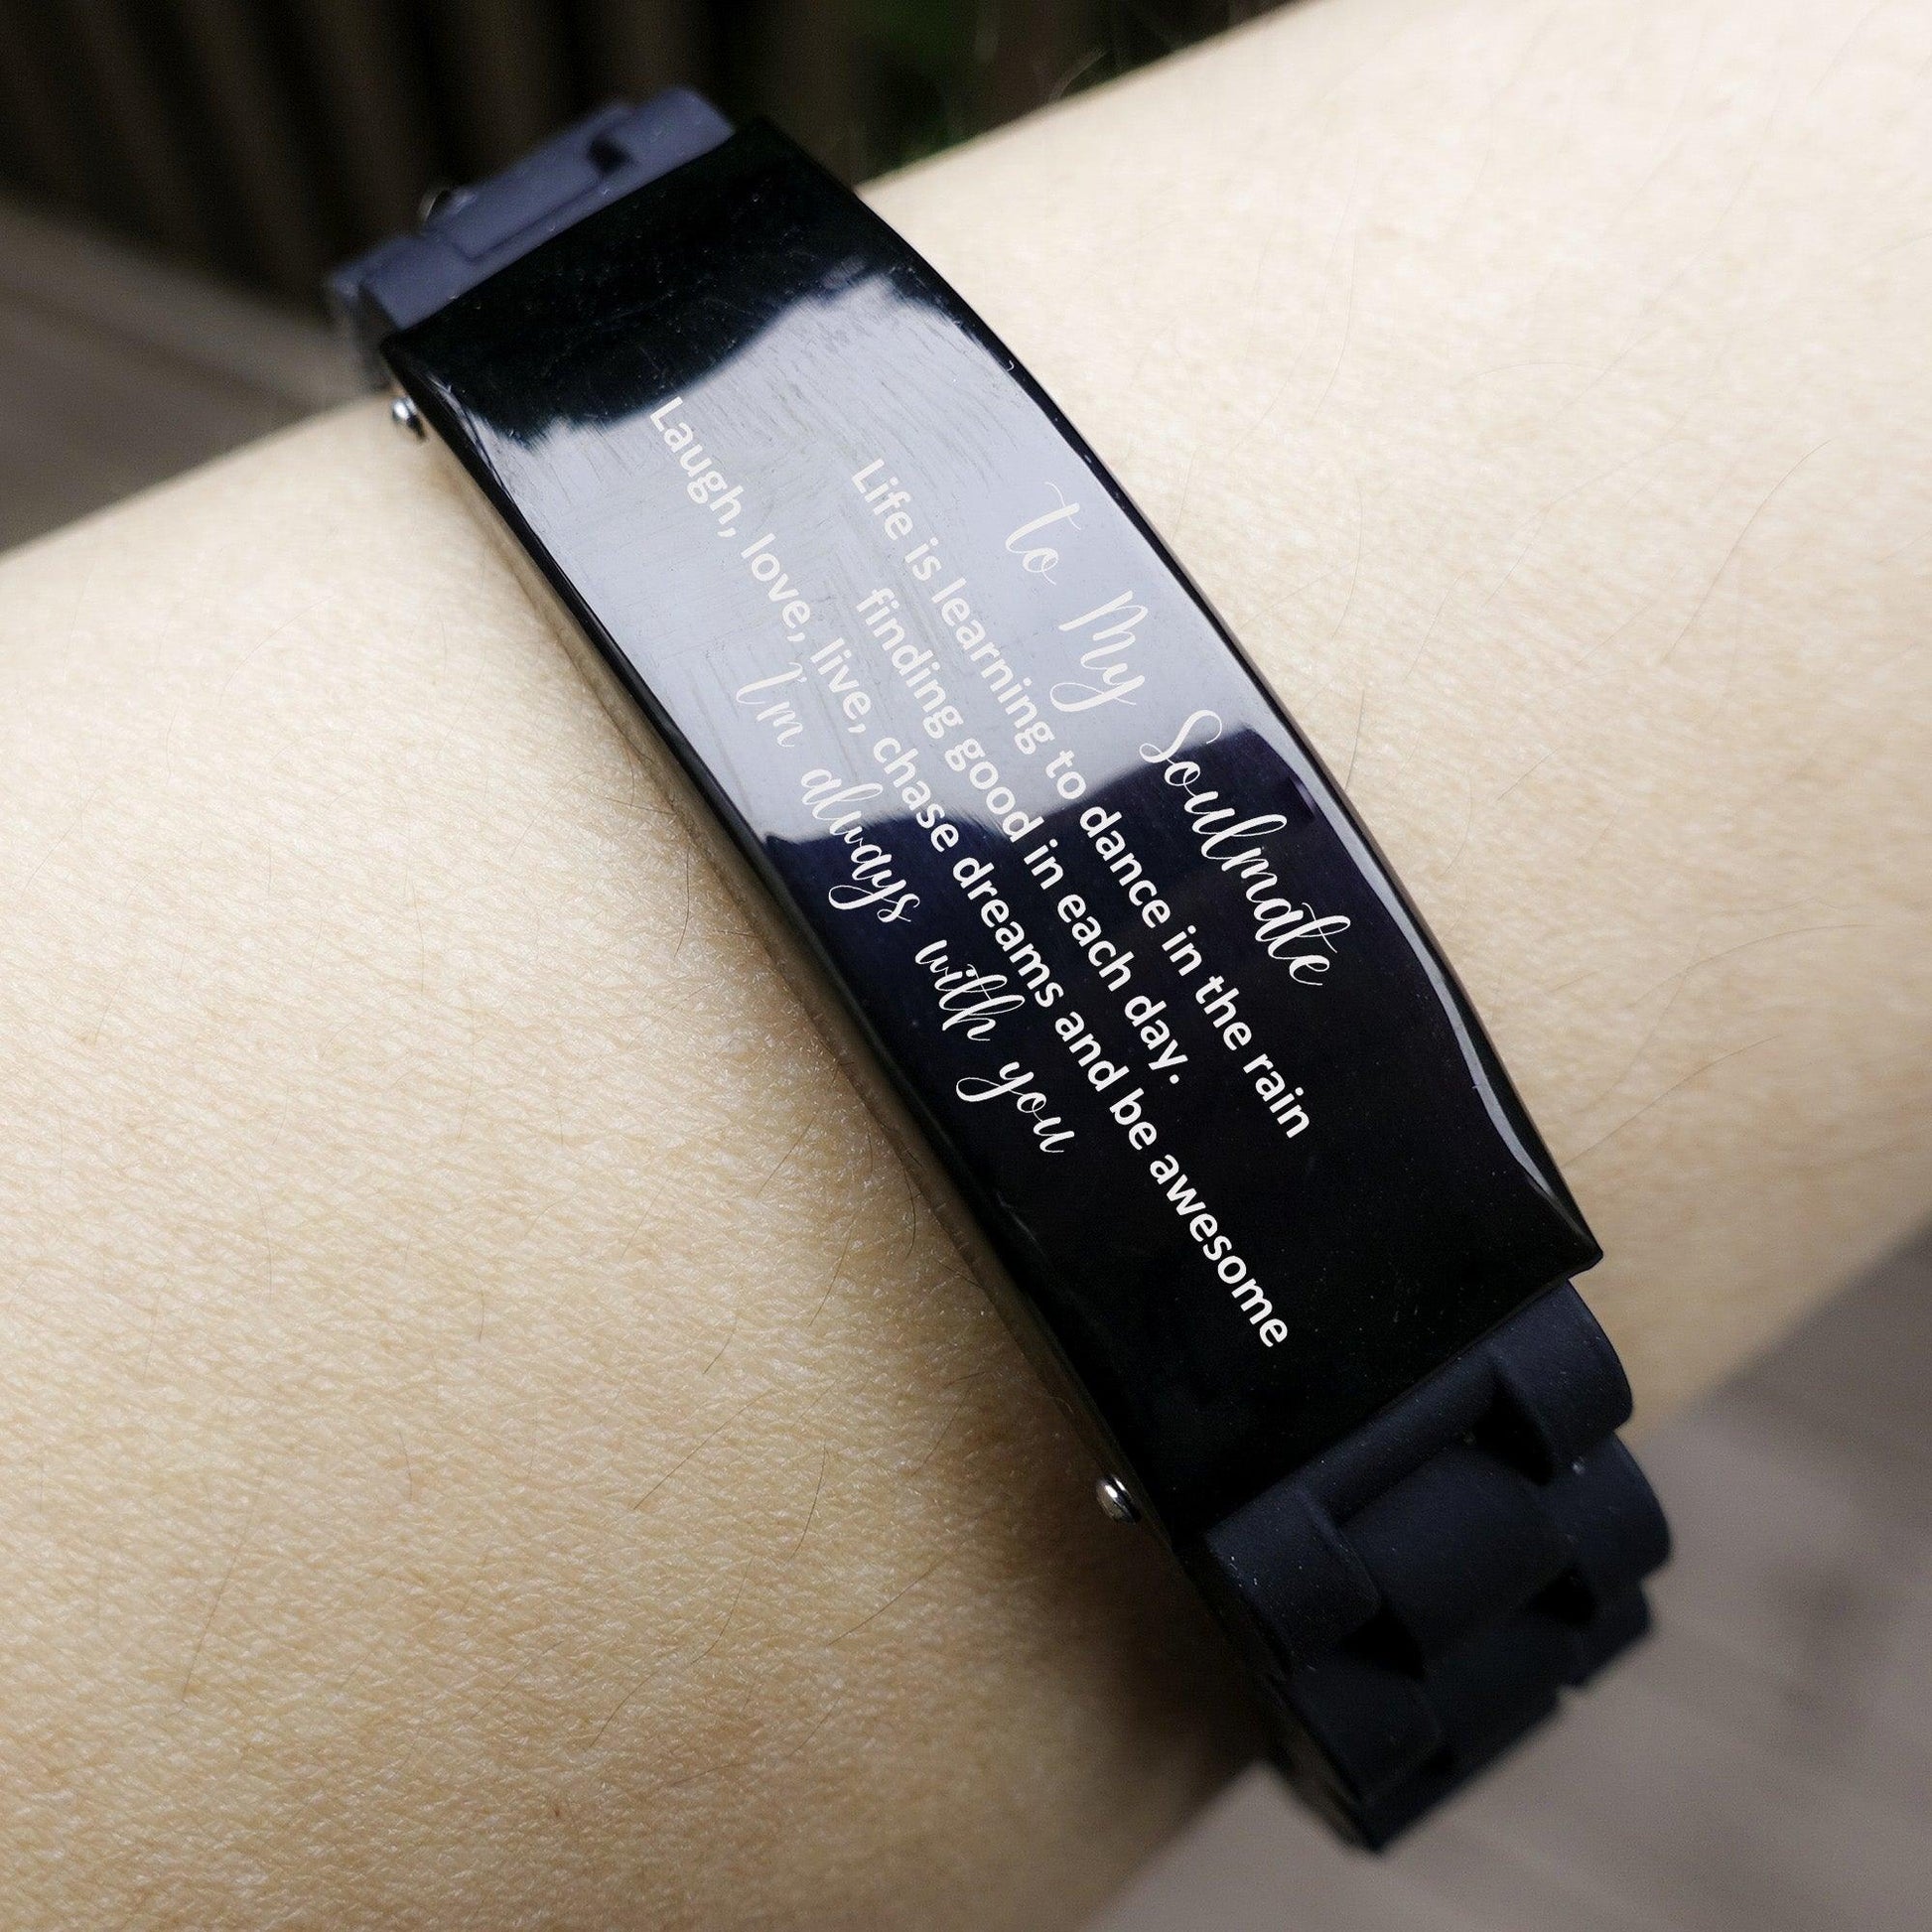 Heartfelt Soulmate Engraved Black Glidelock Clasp Bracelet - Life is Learning to Dance in the Rain, I'm always with you- Birthday, Christmas Holiday Gifts - Mallard Moon Gift Shop